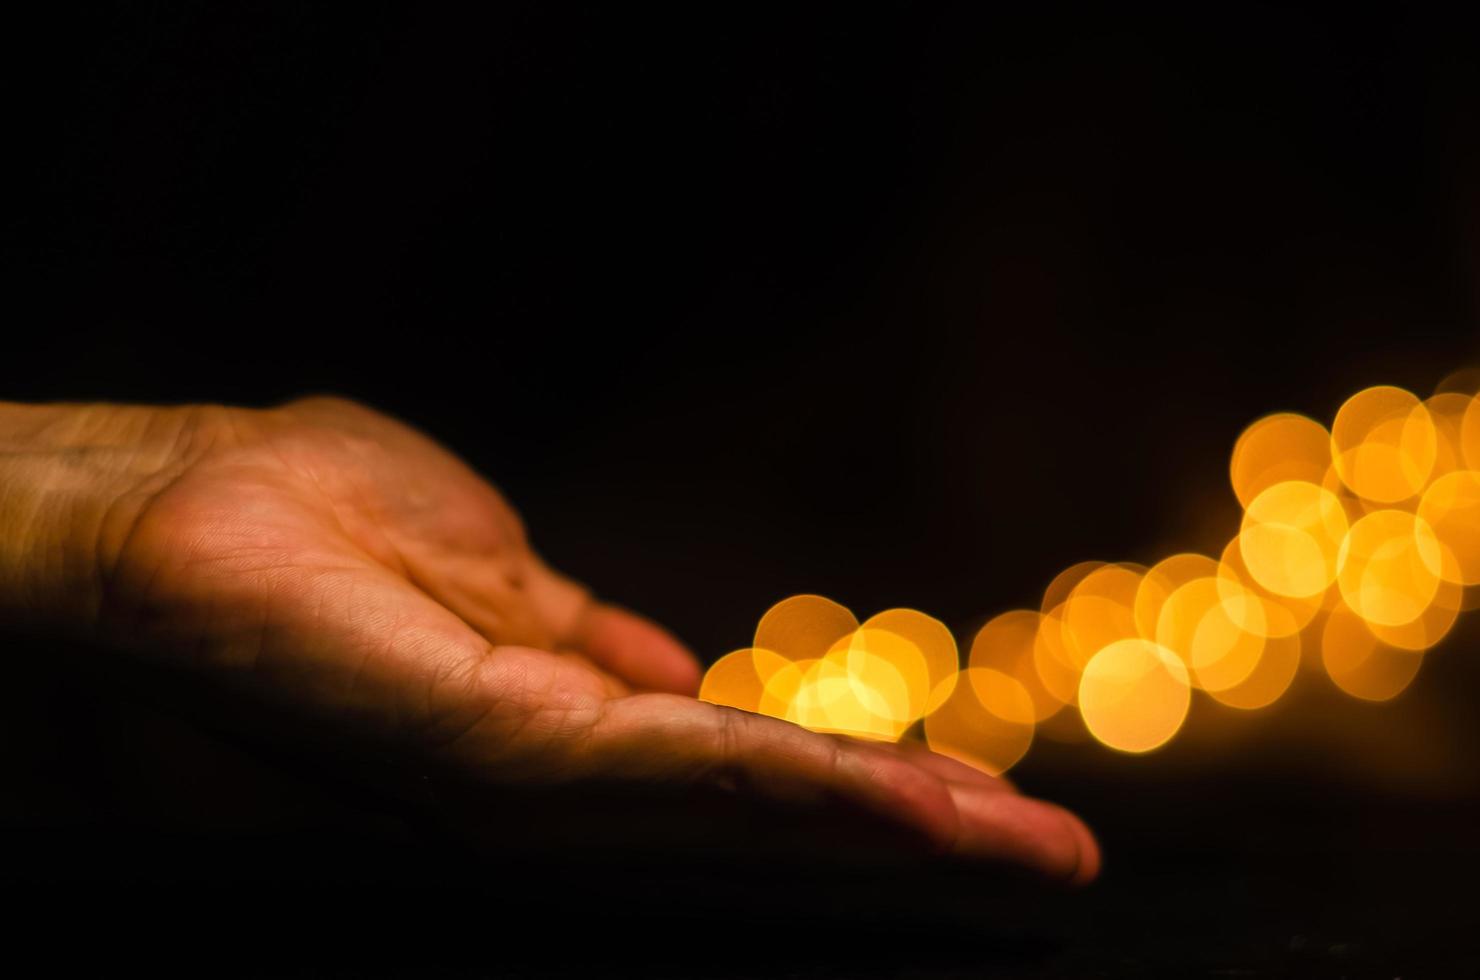 The hand releases yellow round shape bokeh light on black background. photo